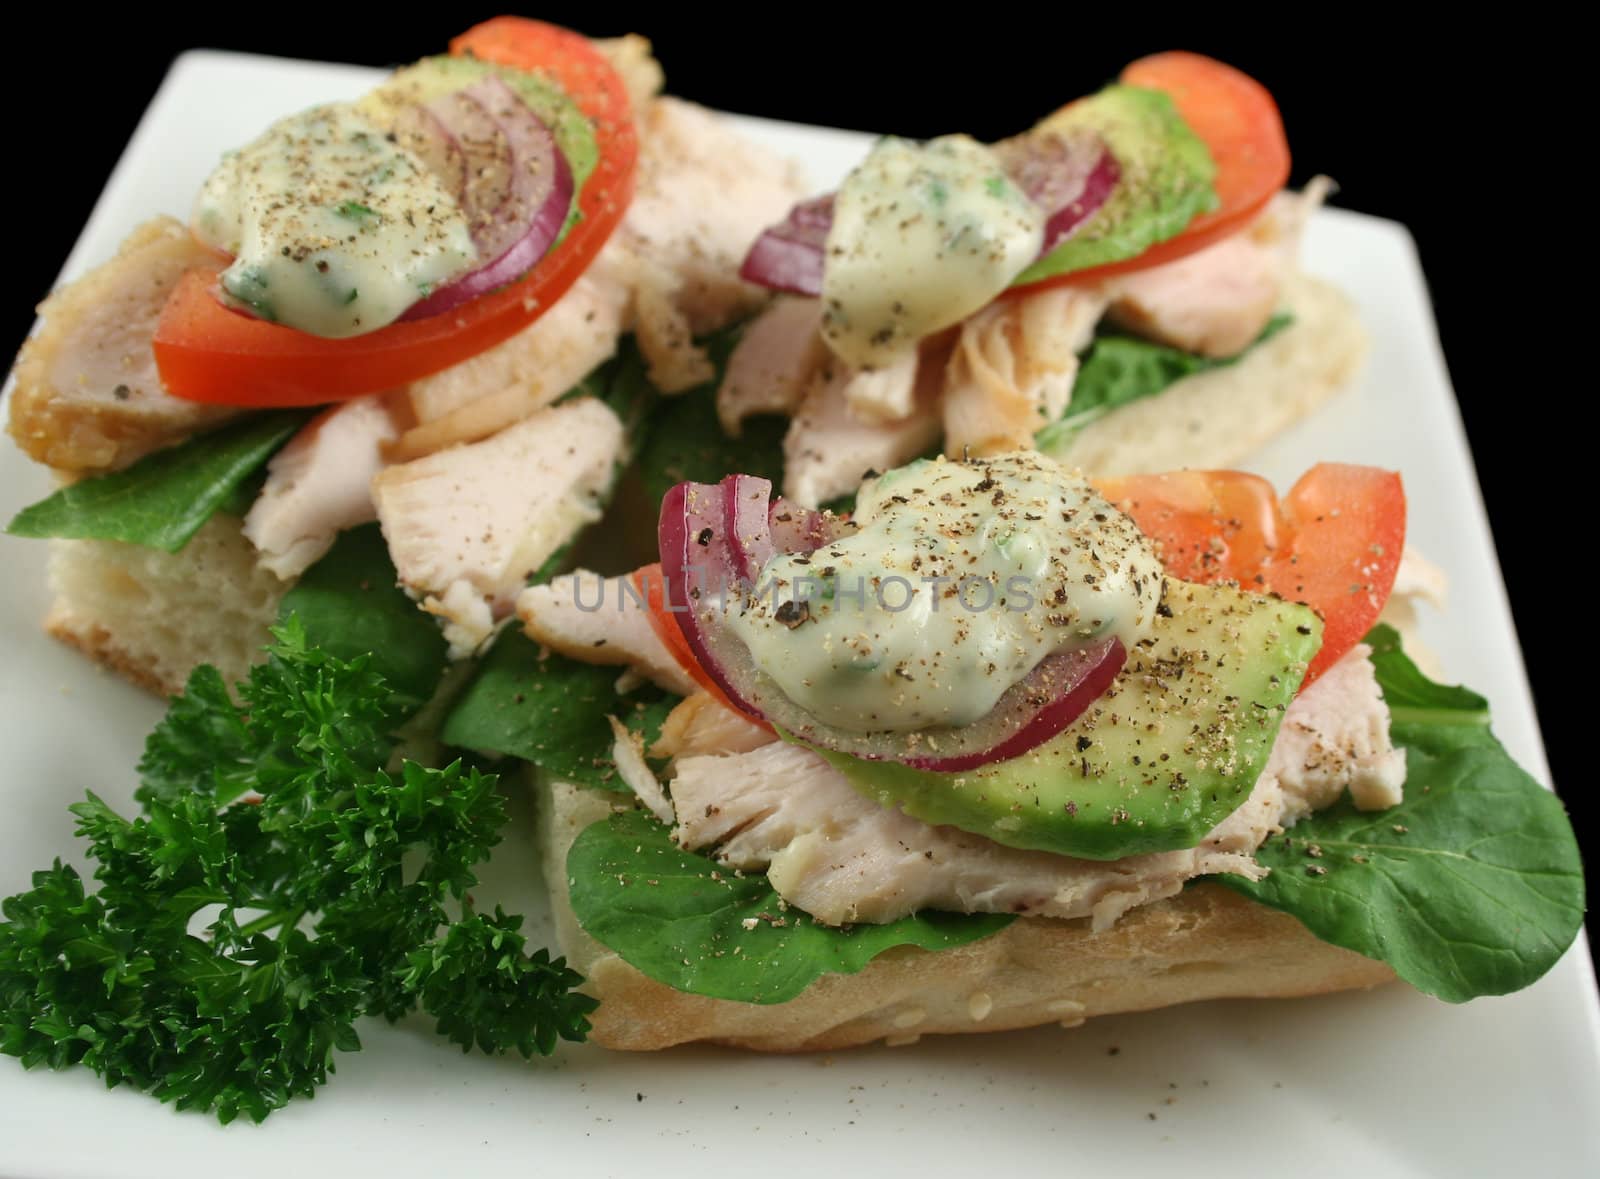 Fresh open chicken finger sandwiches with avocado red onion and mayo with lettuce